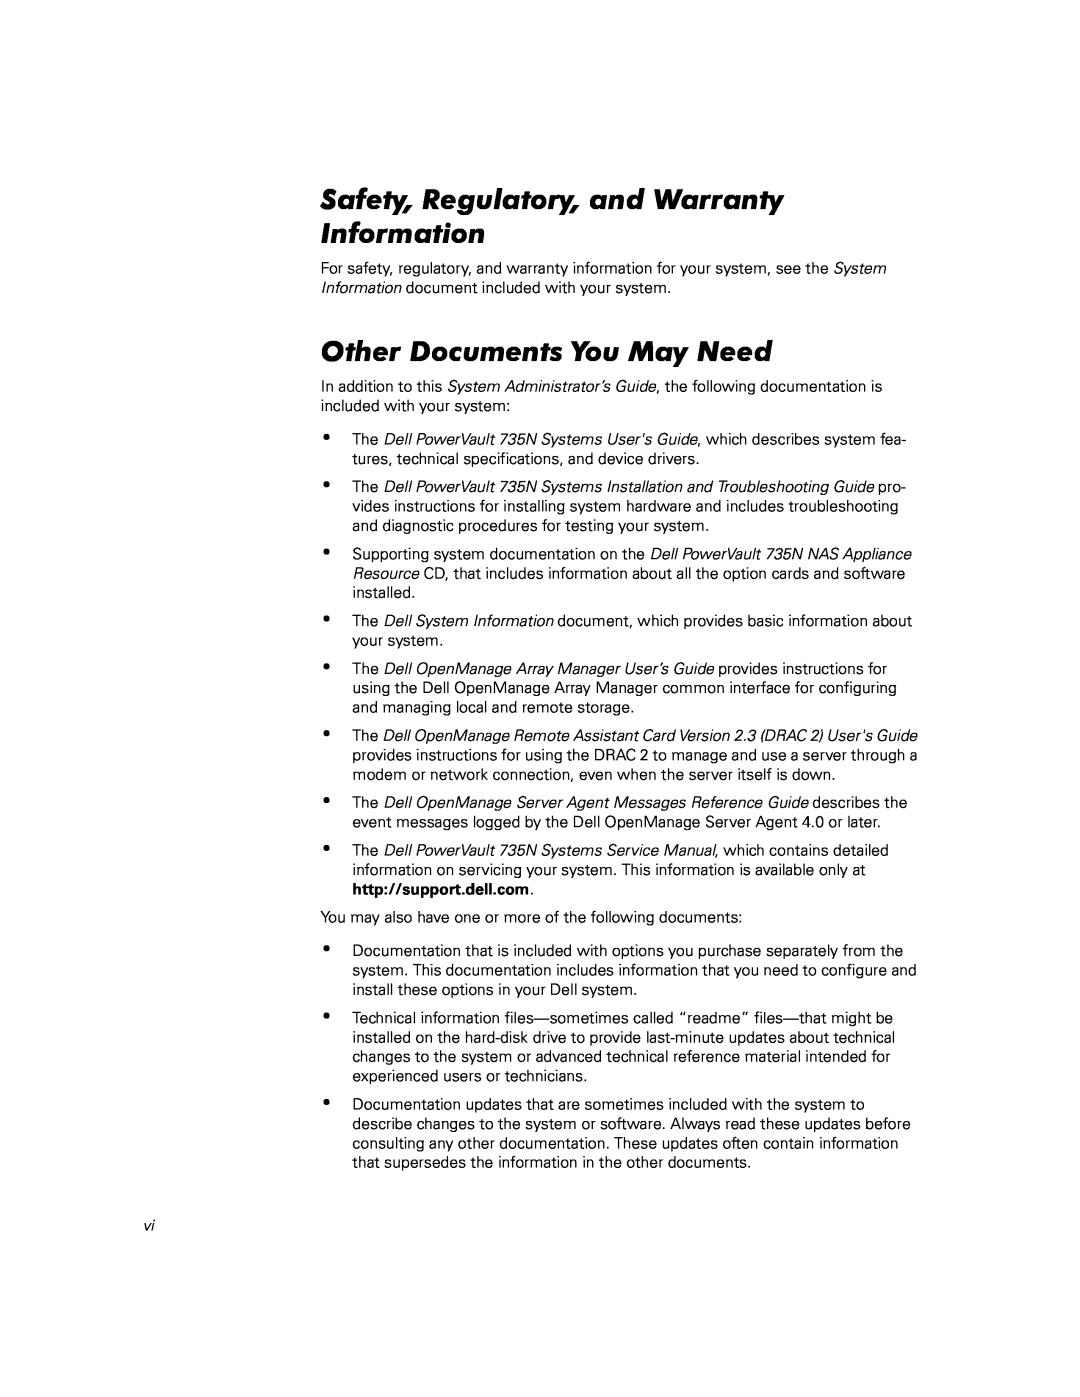 Dell 735 warranty Safety, Regulatory, and Warranty Information, Other Documents You May Need 